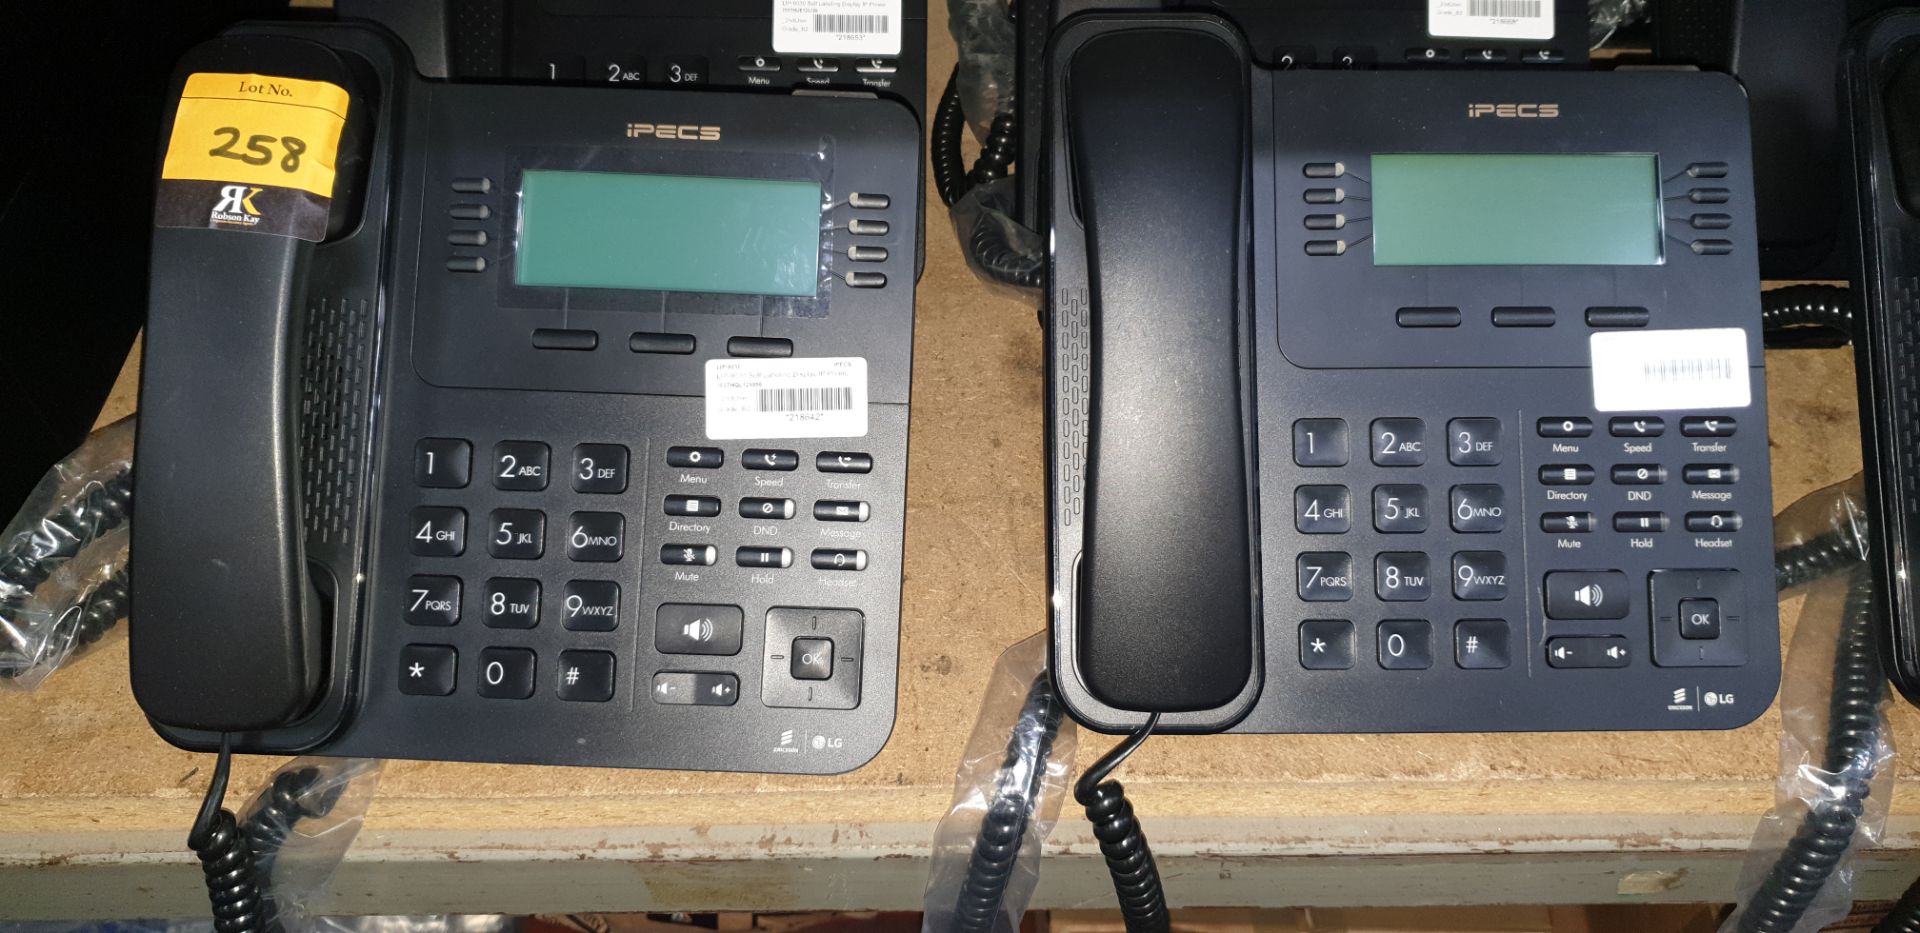 13 off iPECS IP phone handsets, comprising 12 off model LIP-9030 & 1 off LIP model 9020 with 24 butt - Image 2 of 8